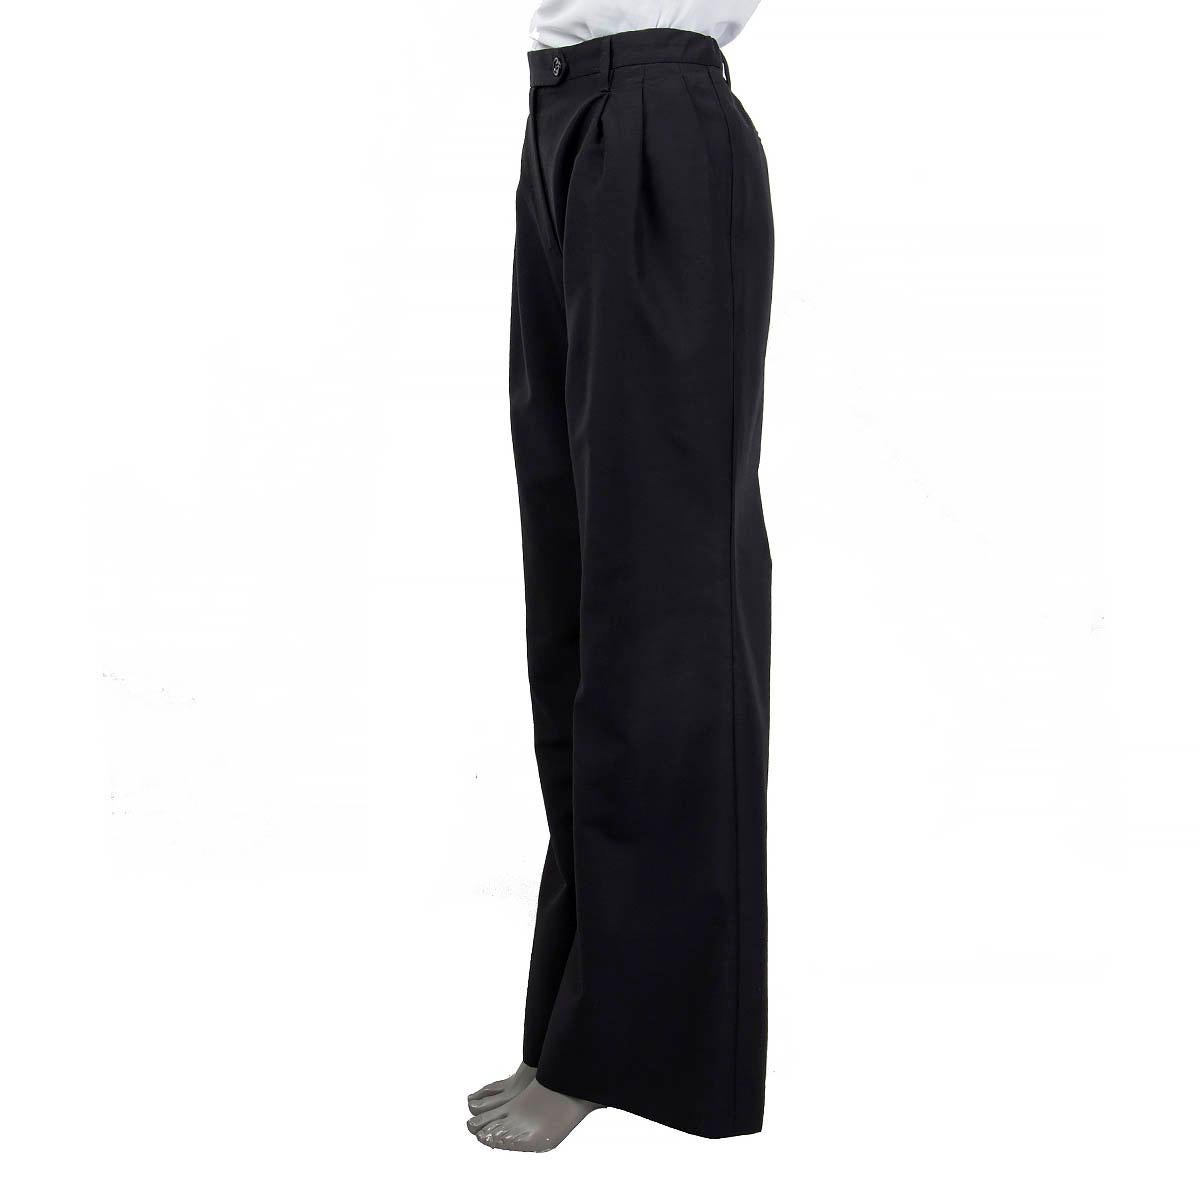 100% authentic Prada mid waist wide-straight leg pants in charcoal mohair (60%) and wool (40%). Features Prada logo embroidery on the inner left side and opens with a black button in the front. unlined. Have been worn and are in very good condition.